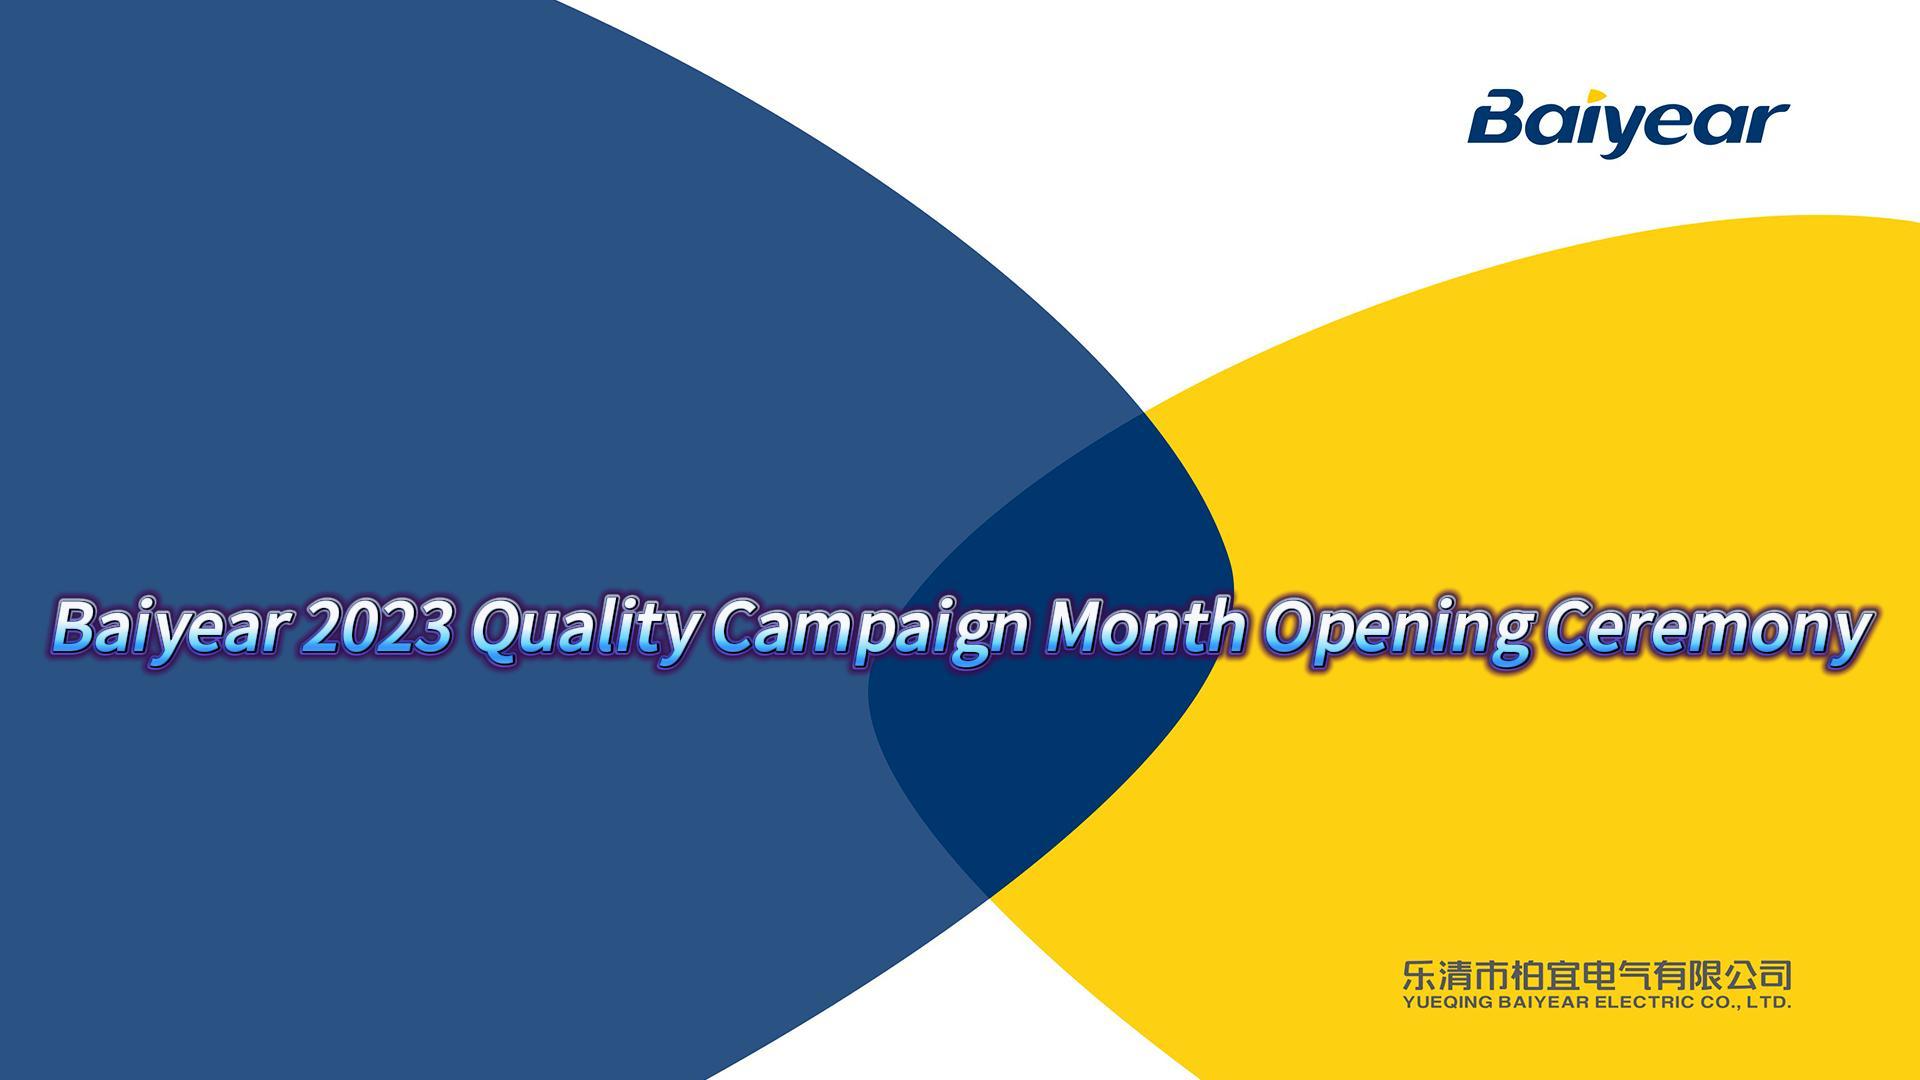 Baiyear Plastic Component Injection Molding Factory,  Opening Ceremony of 2023 Quality Campaign